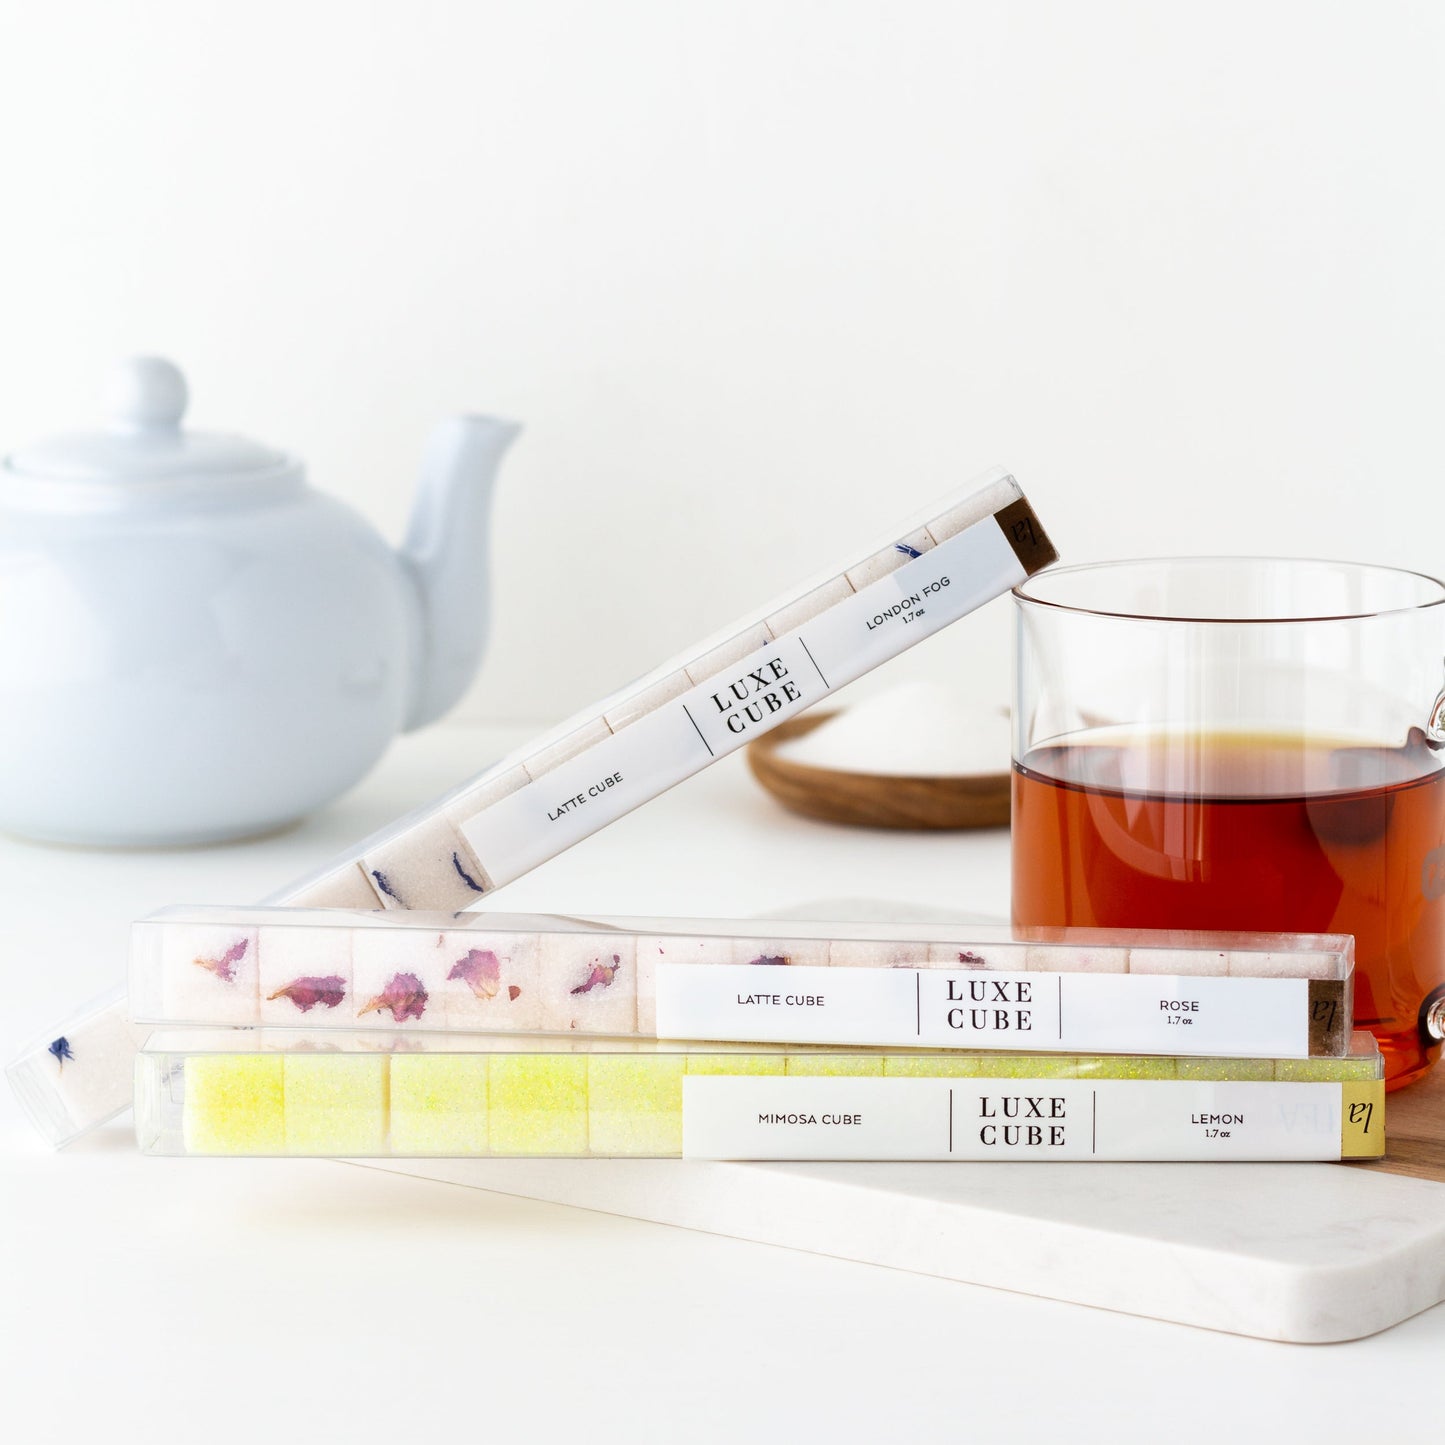 Luxe Sugar Cubes. Packages of 3 flavors (London Fog, Rose, and Lemon) displayed near a mug of tea, with white teapot in background.